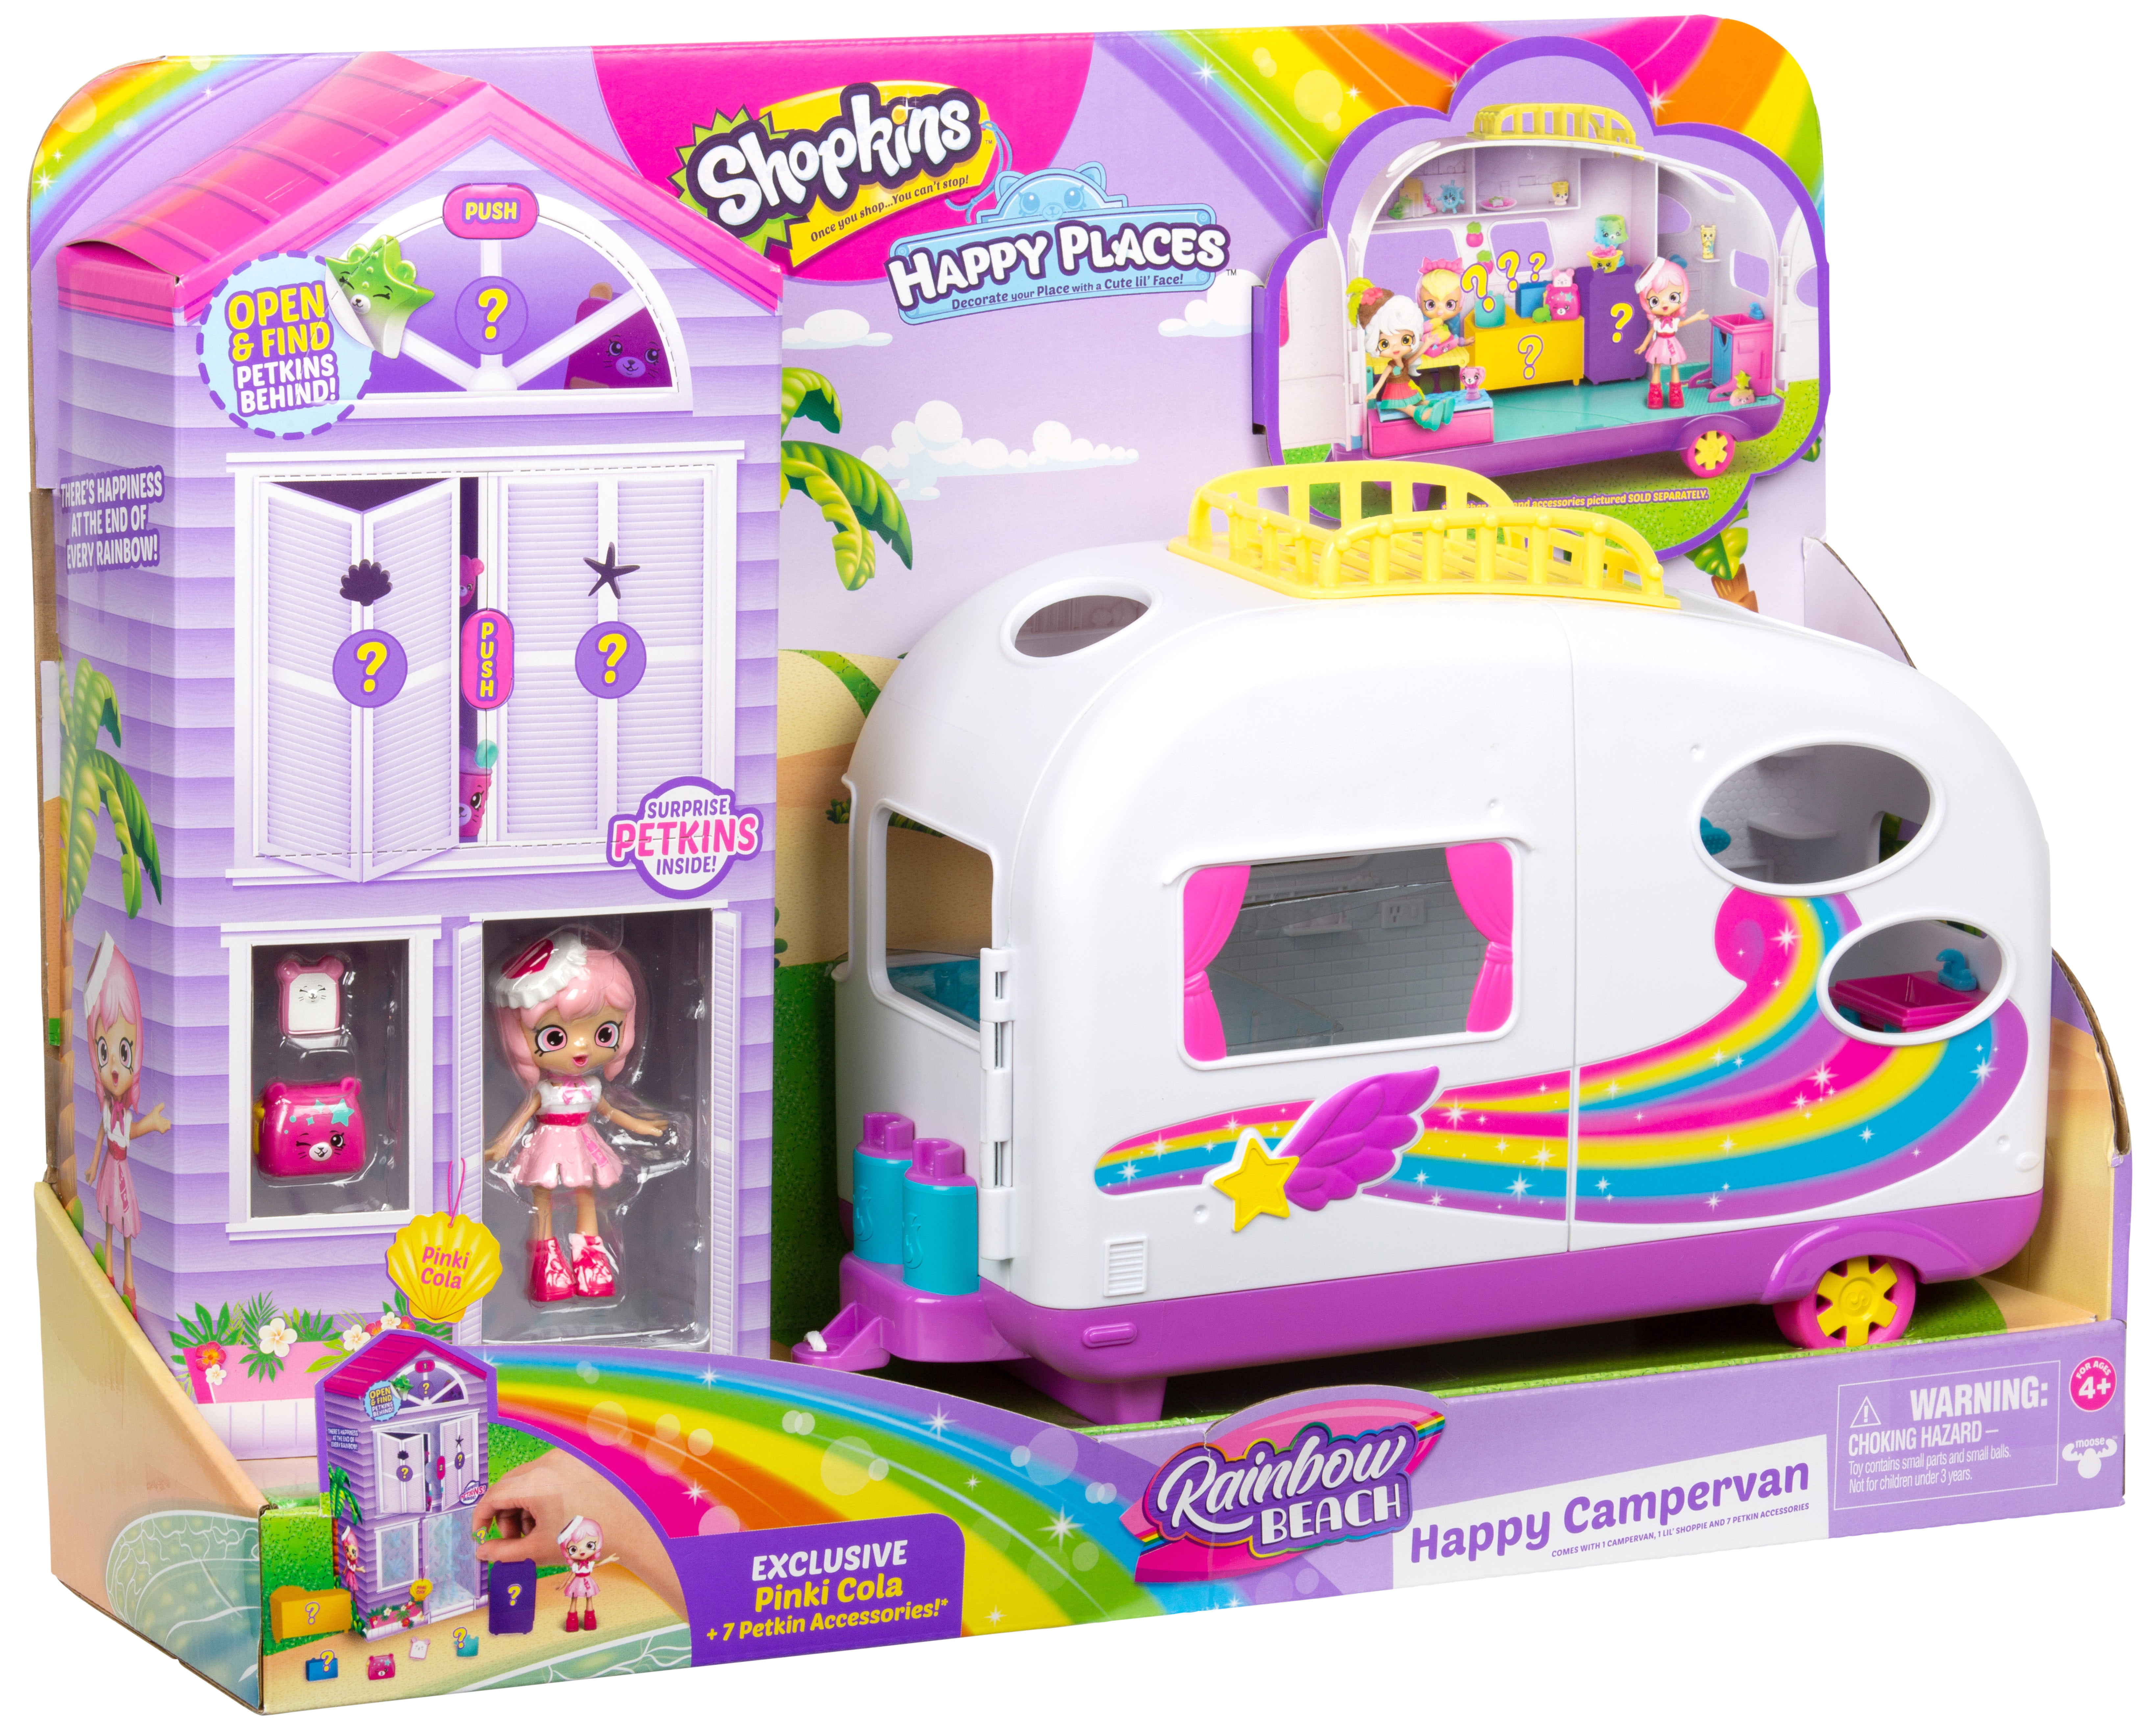 Best Shopkins House & Shopkins for sale in Saanich Peninsula and